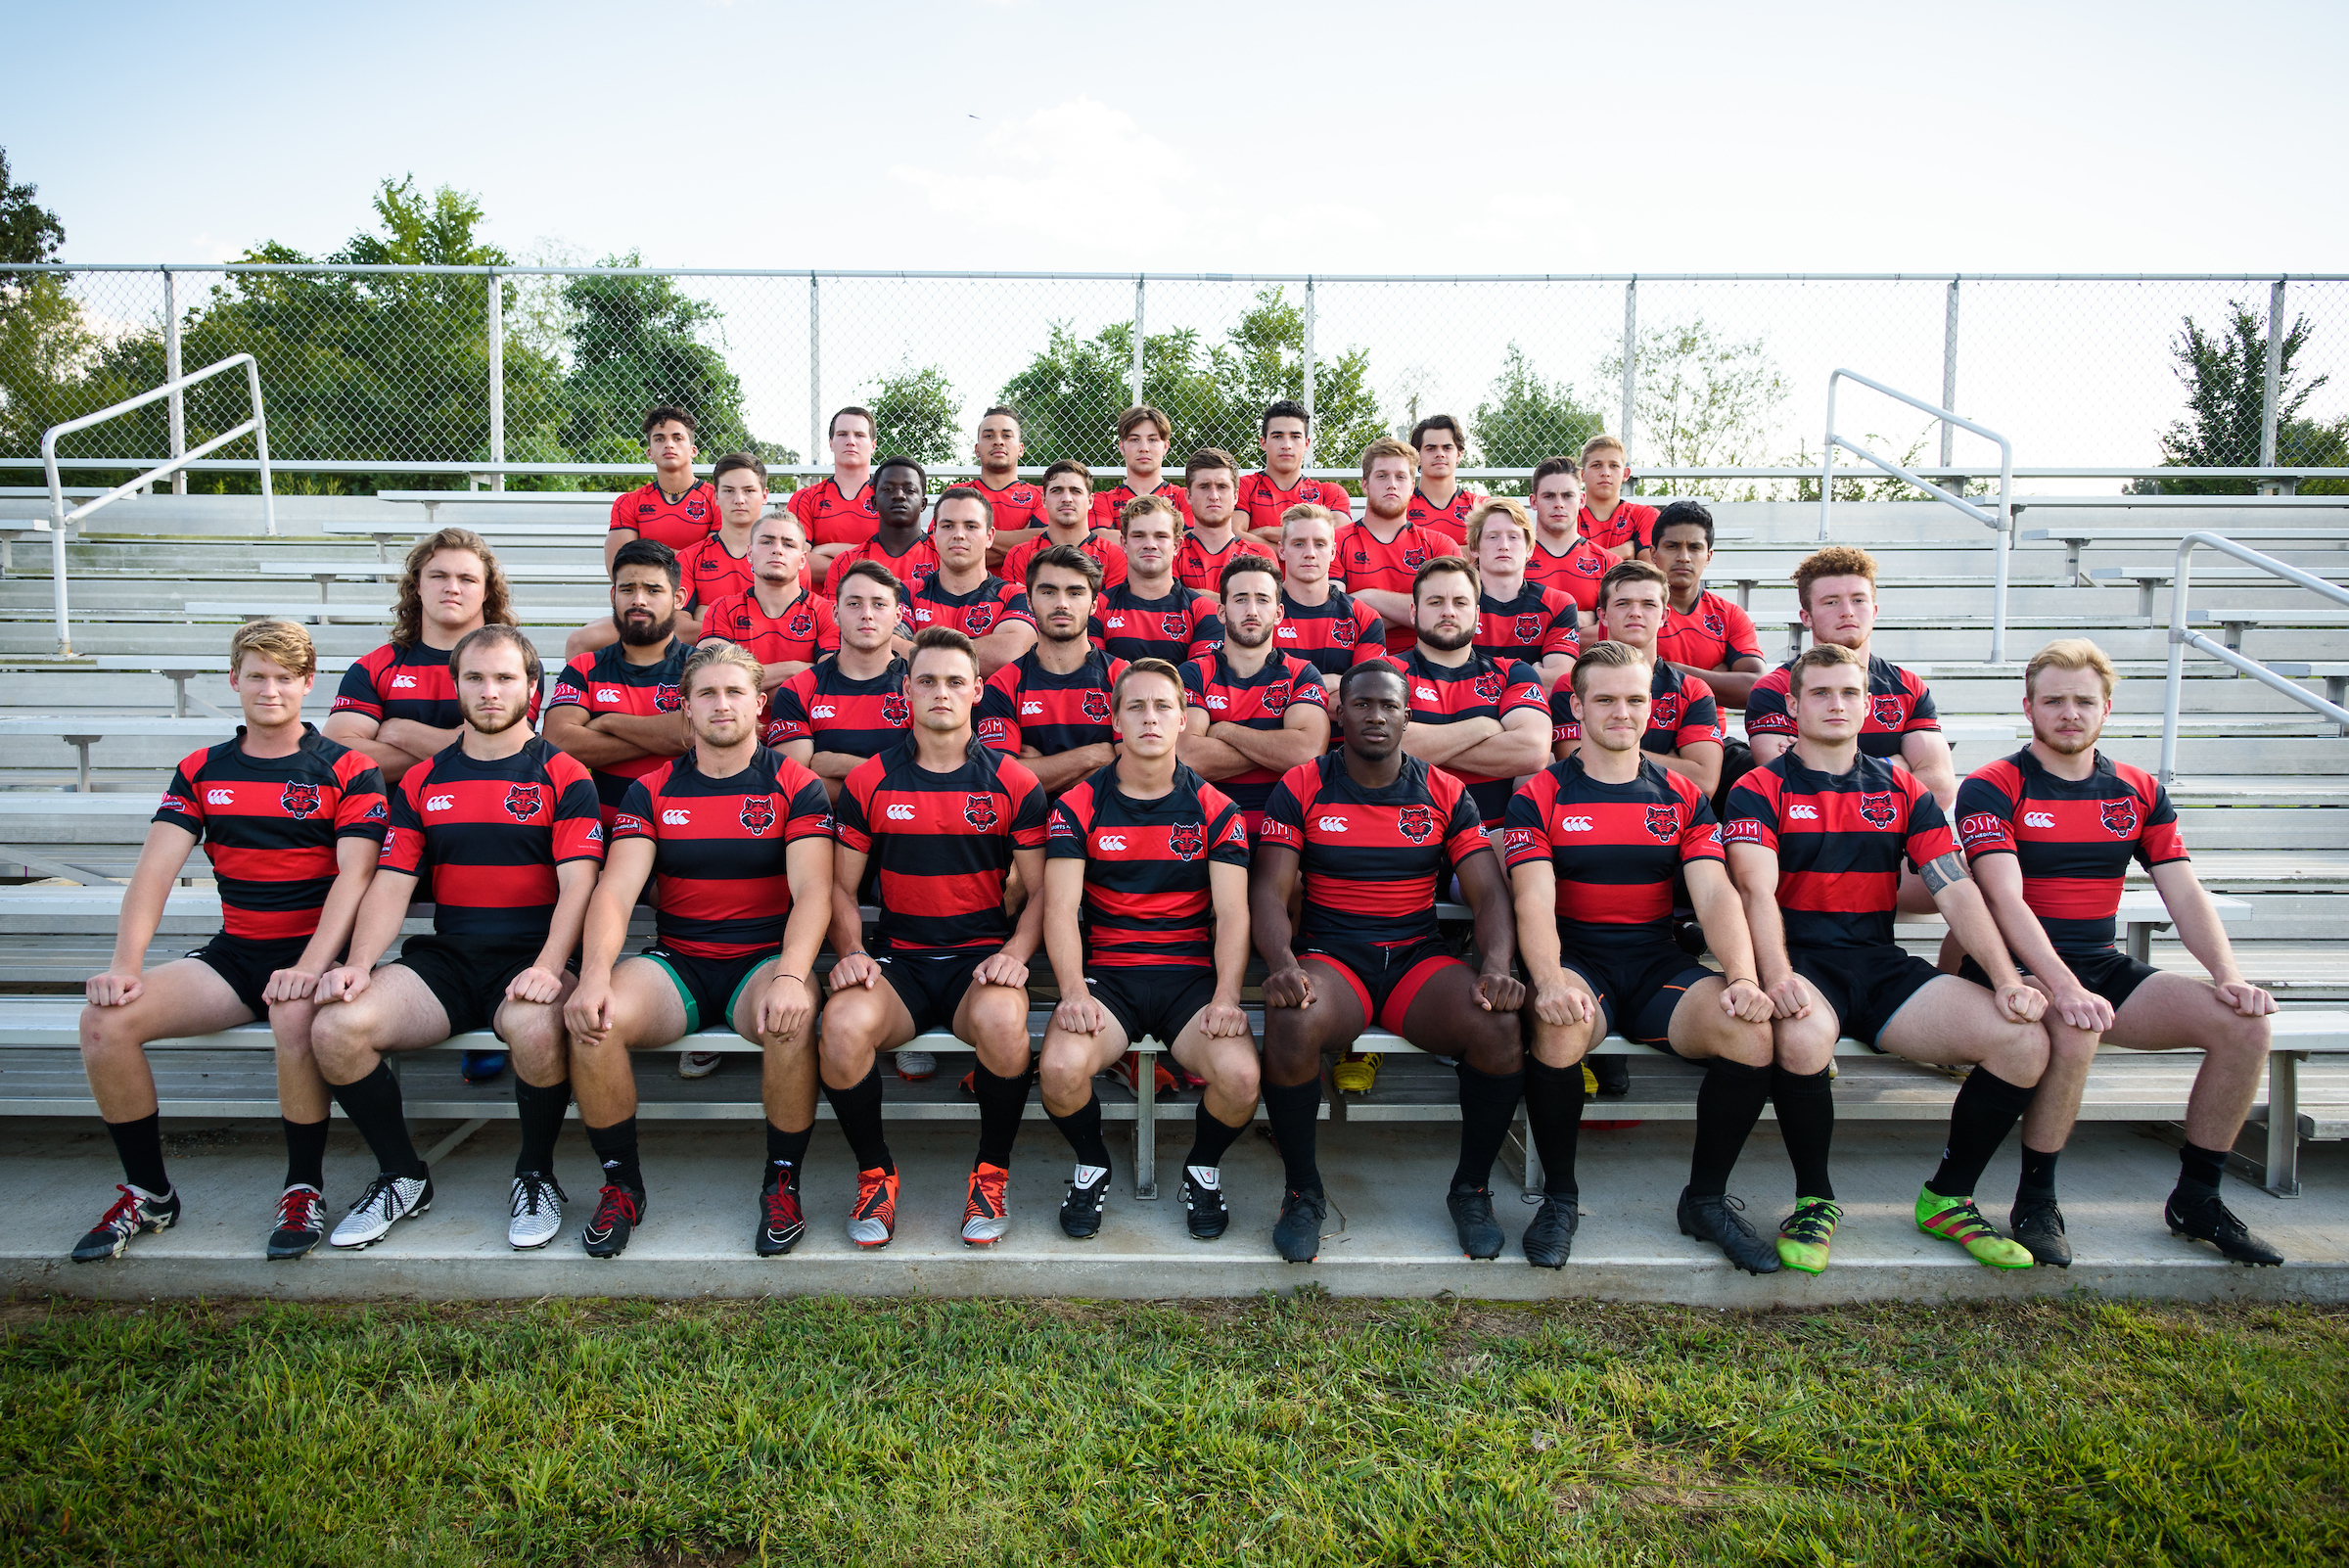 2018 Arkansas State rugby team